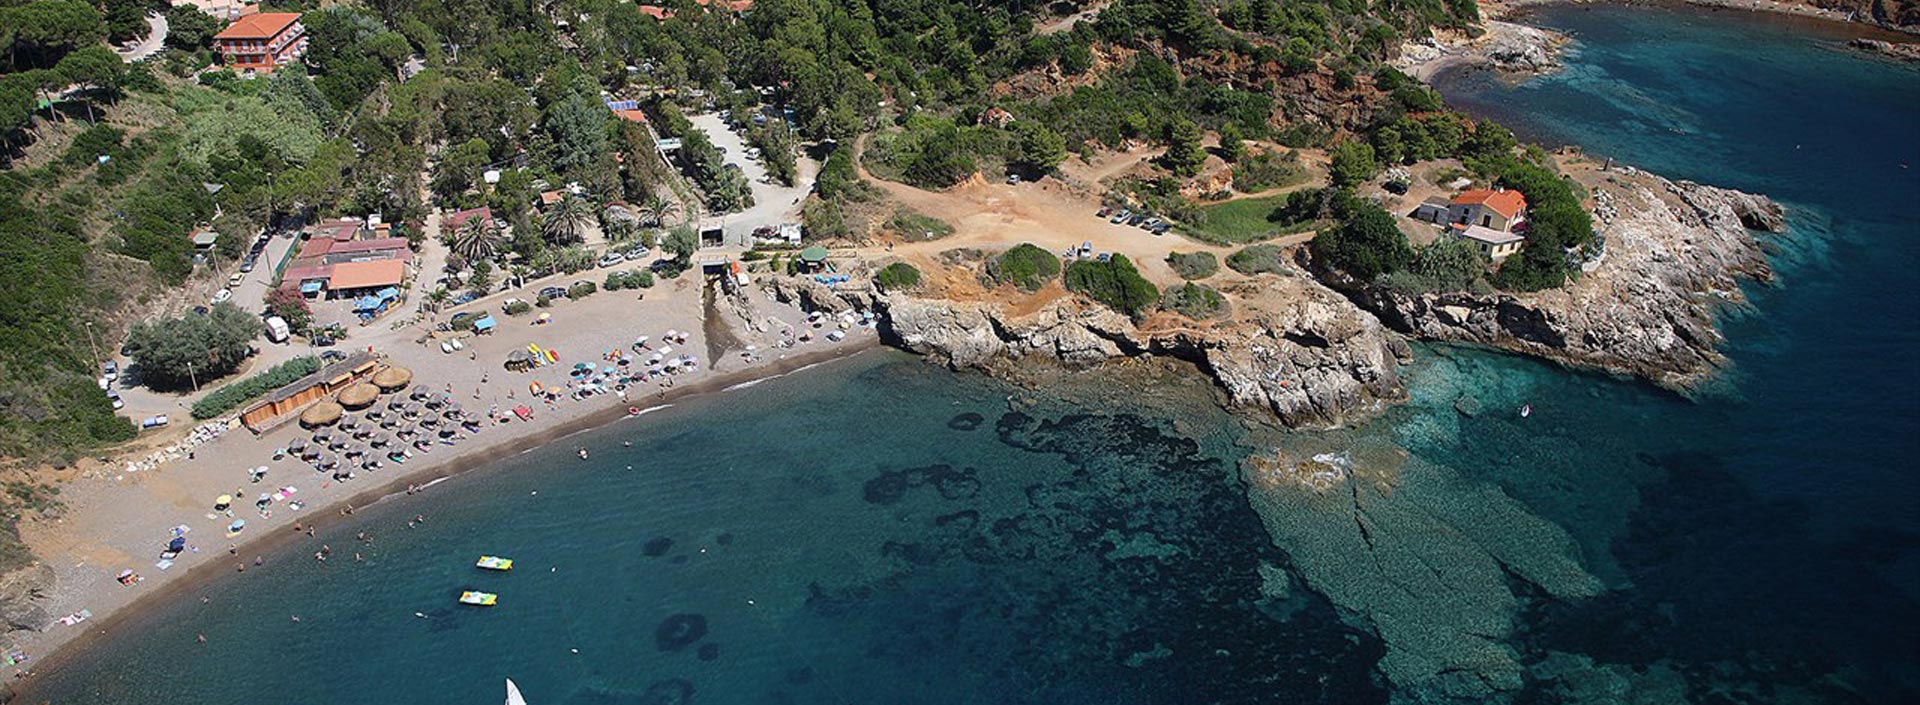 Camping Reale on the Island of Elba